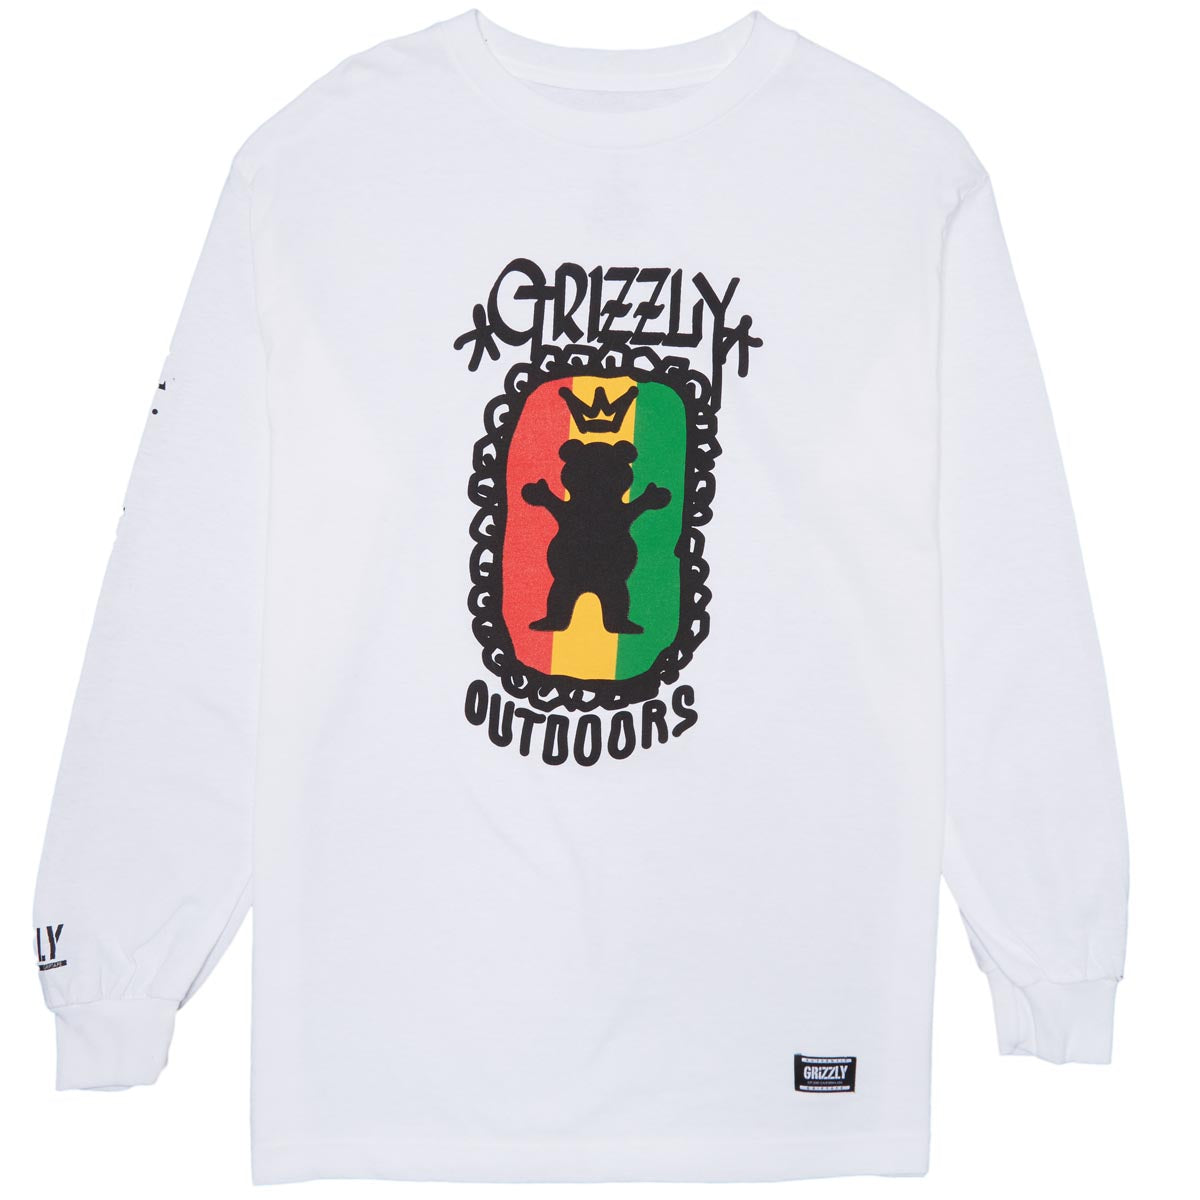 Grizzly Most High Long Sleeve T-Shirt - White image 1